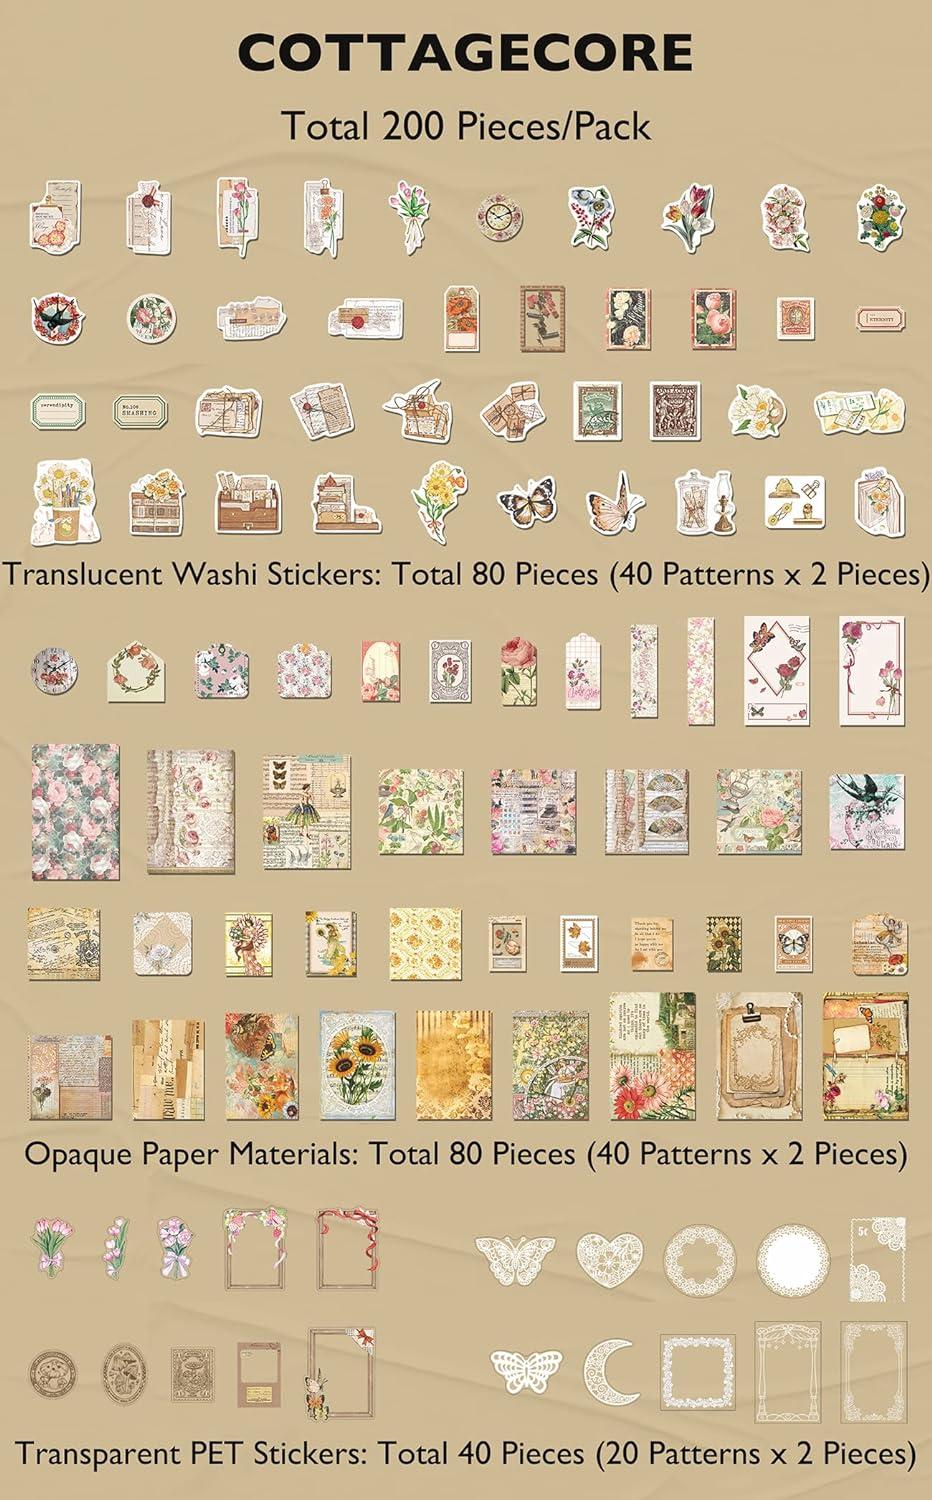  Knaid Vintage Scrapbook Supplies Pack (200 Pieces) for Junk  Journal Bullet Journals Planners Botanical Paper Stickers Craft Kits  Aesthetic Cottagecore Collage Album (Nature)